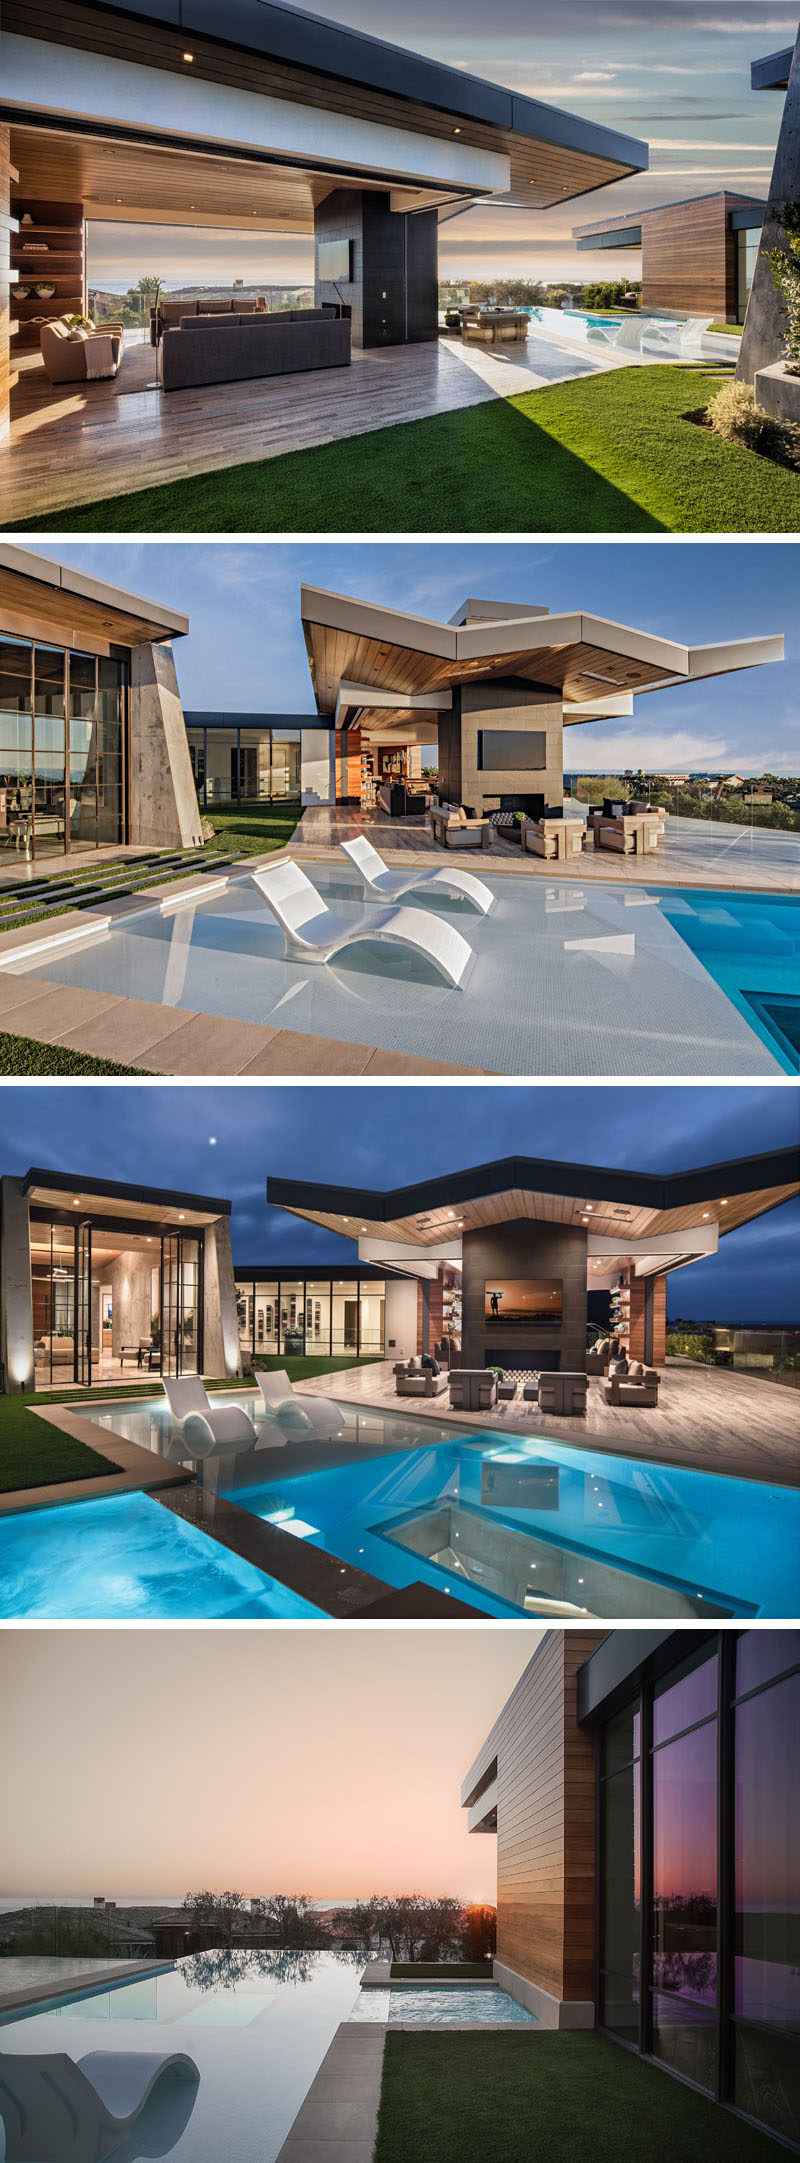 The living room of this modern house opens up to the backyard and swimming pool. The angled roof line stands out above the outdoor lounge that's focused on the fireplace. There's also a swimming pool that looks out to the view, and within in the swimming pool is a window into the basement. #SwimmingPool #OutdoorFireplace #Architecture